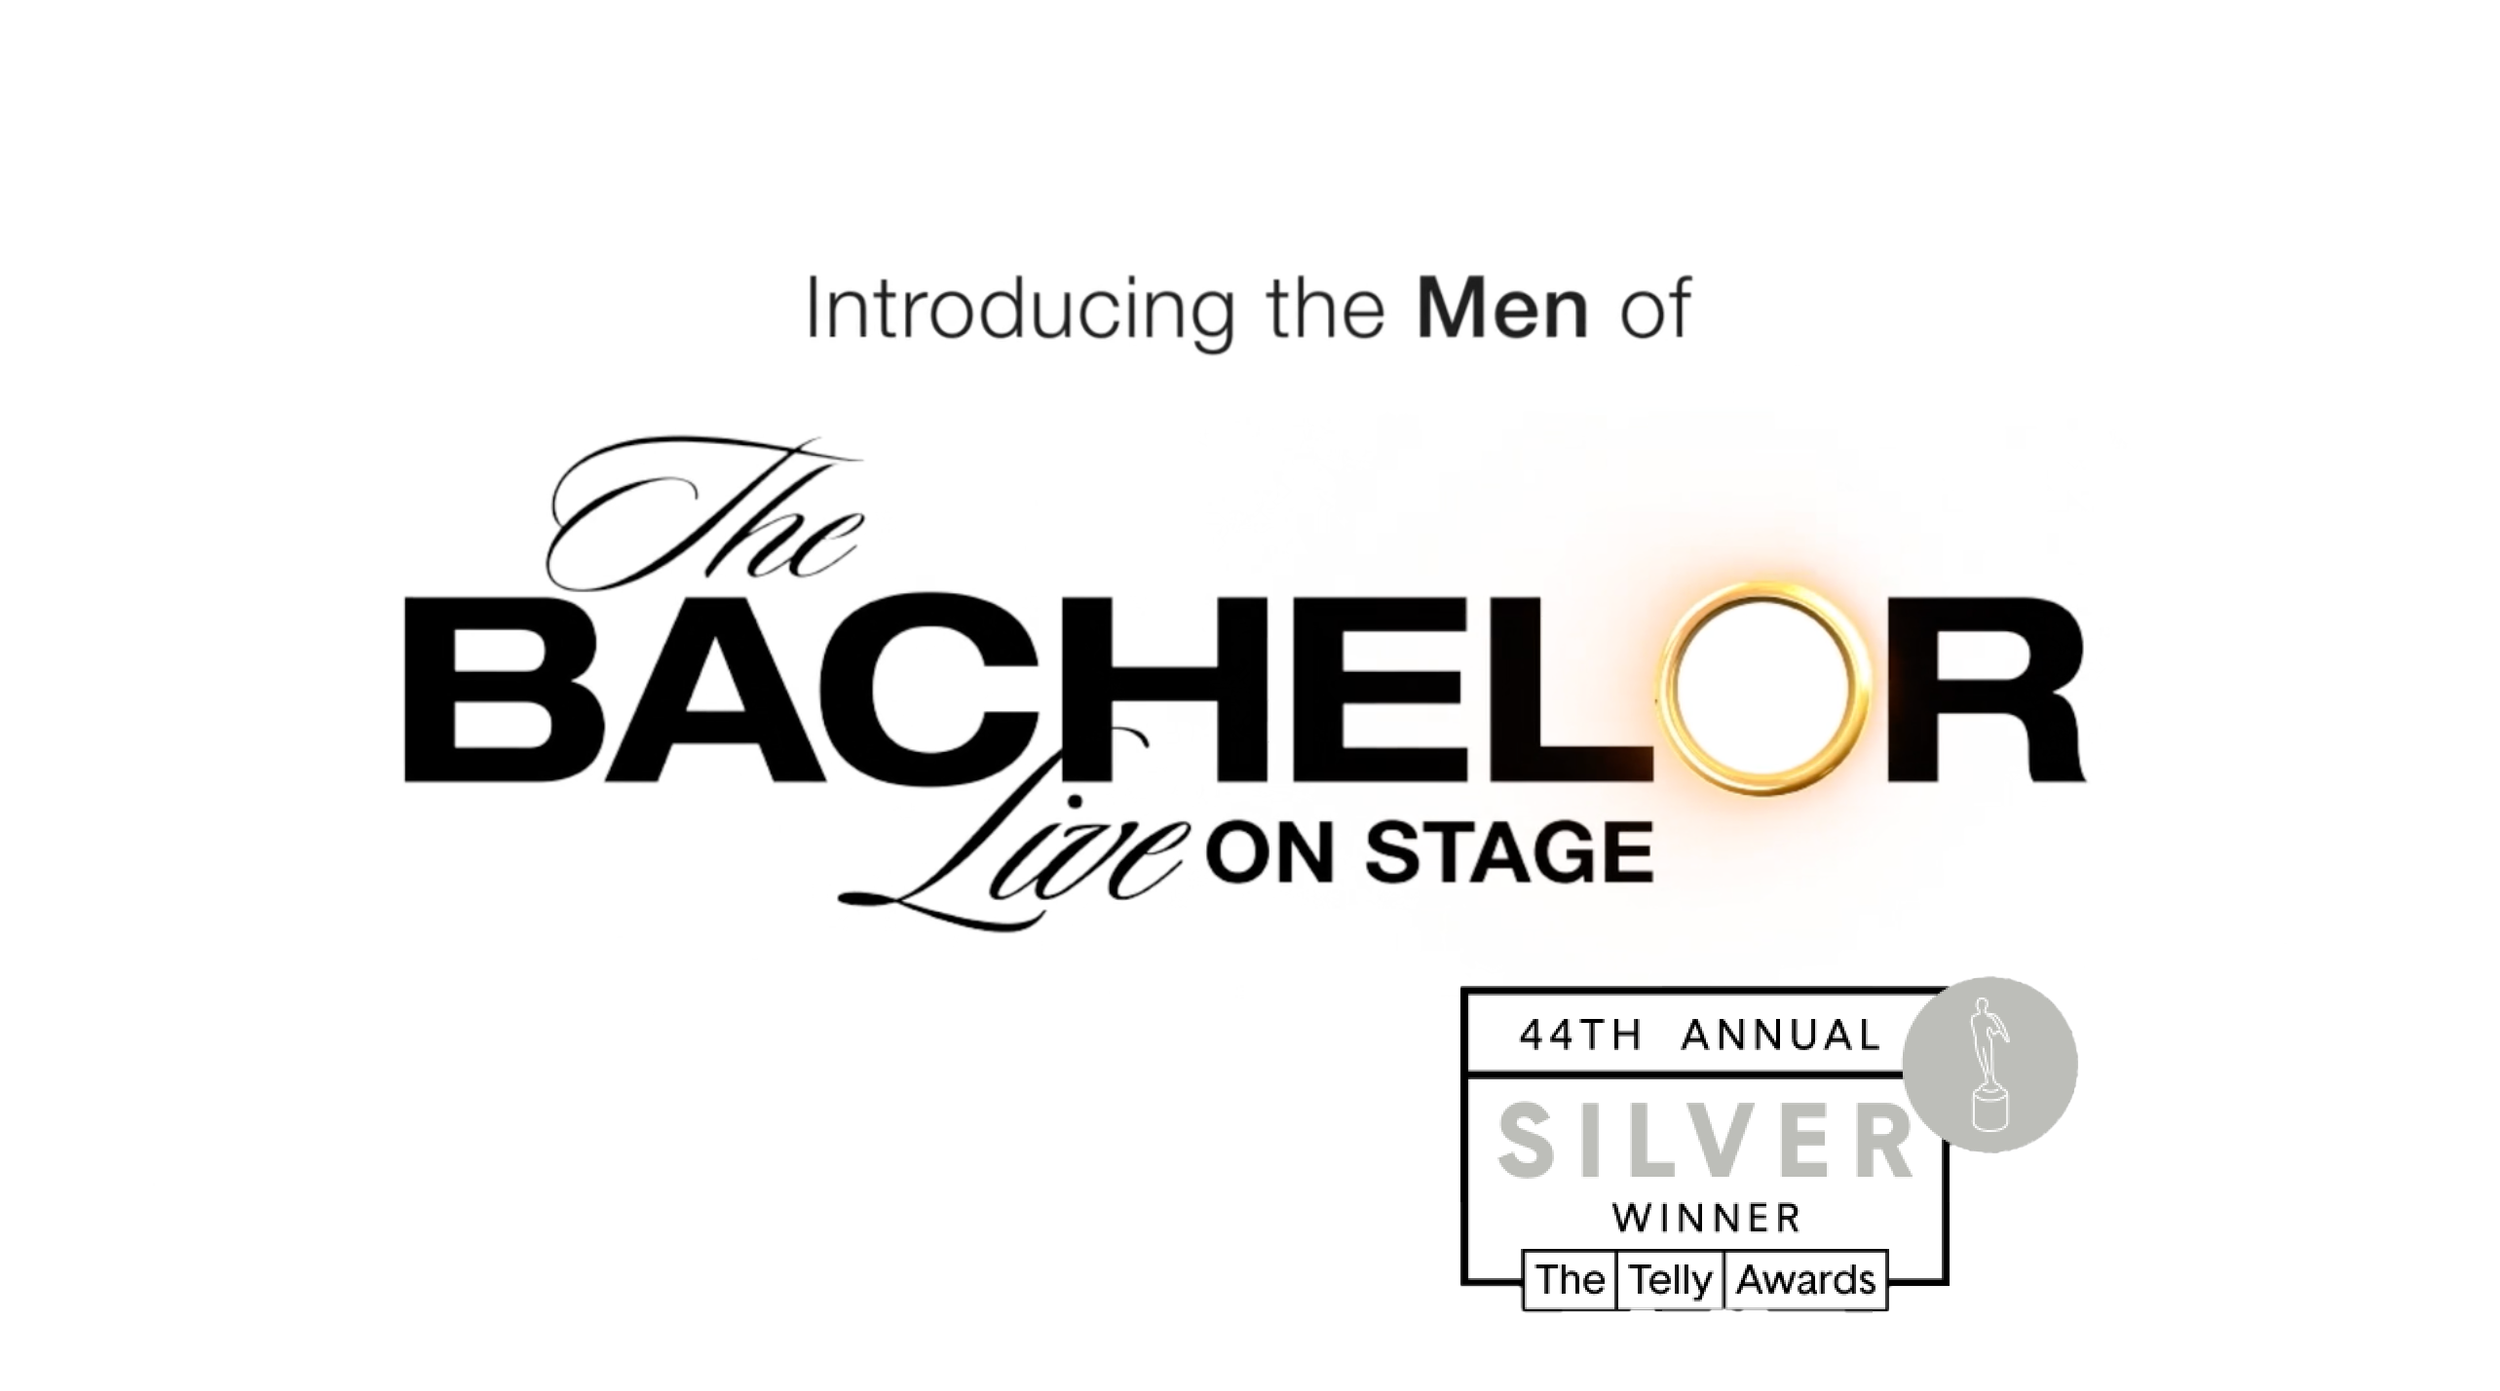 THE BACHELOR LIVE ON STAGE